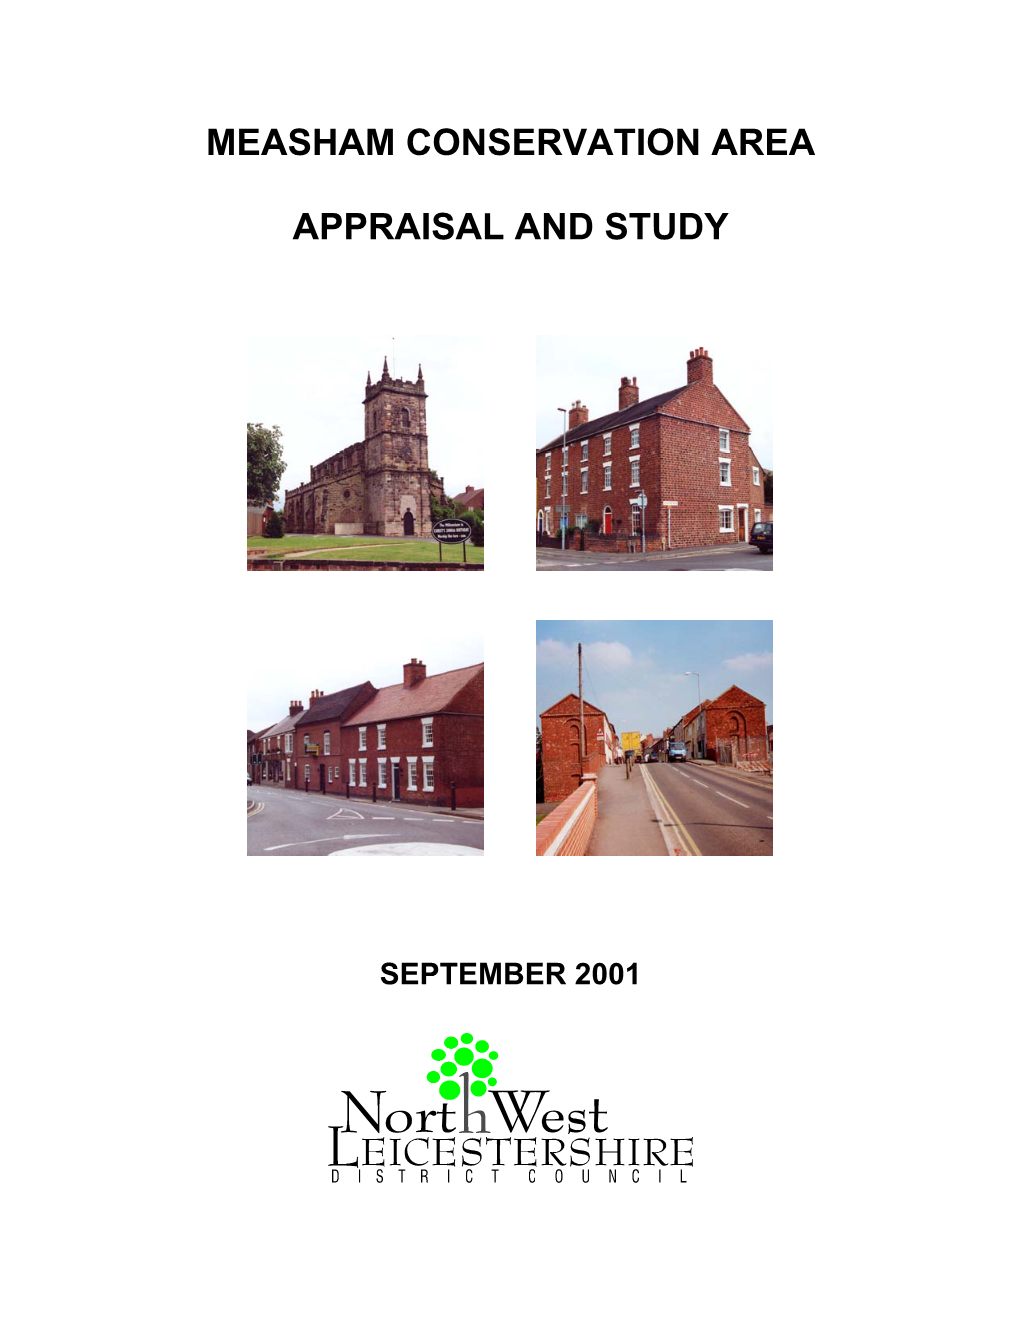 Measham Conservation Area Appraisal and Study